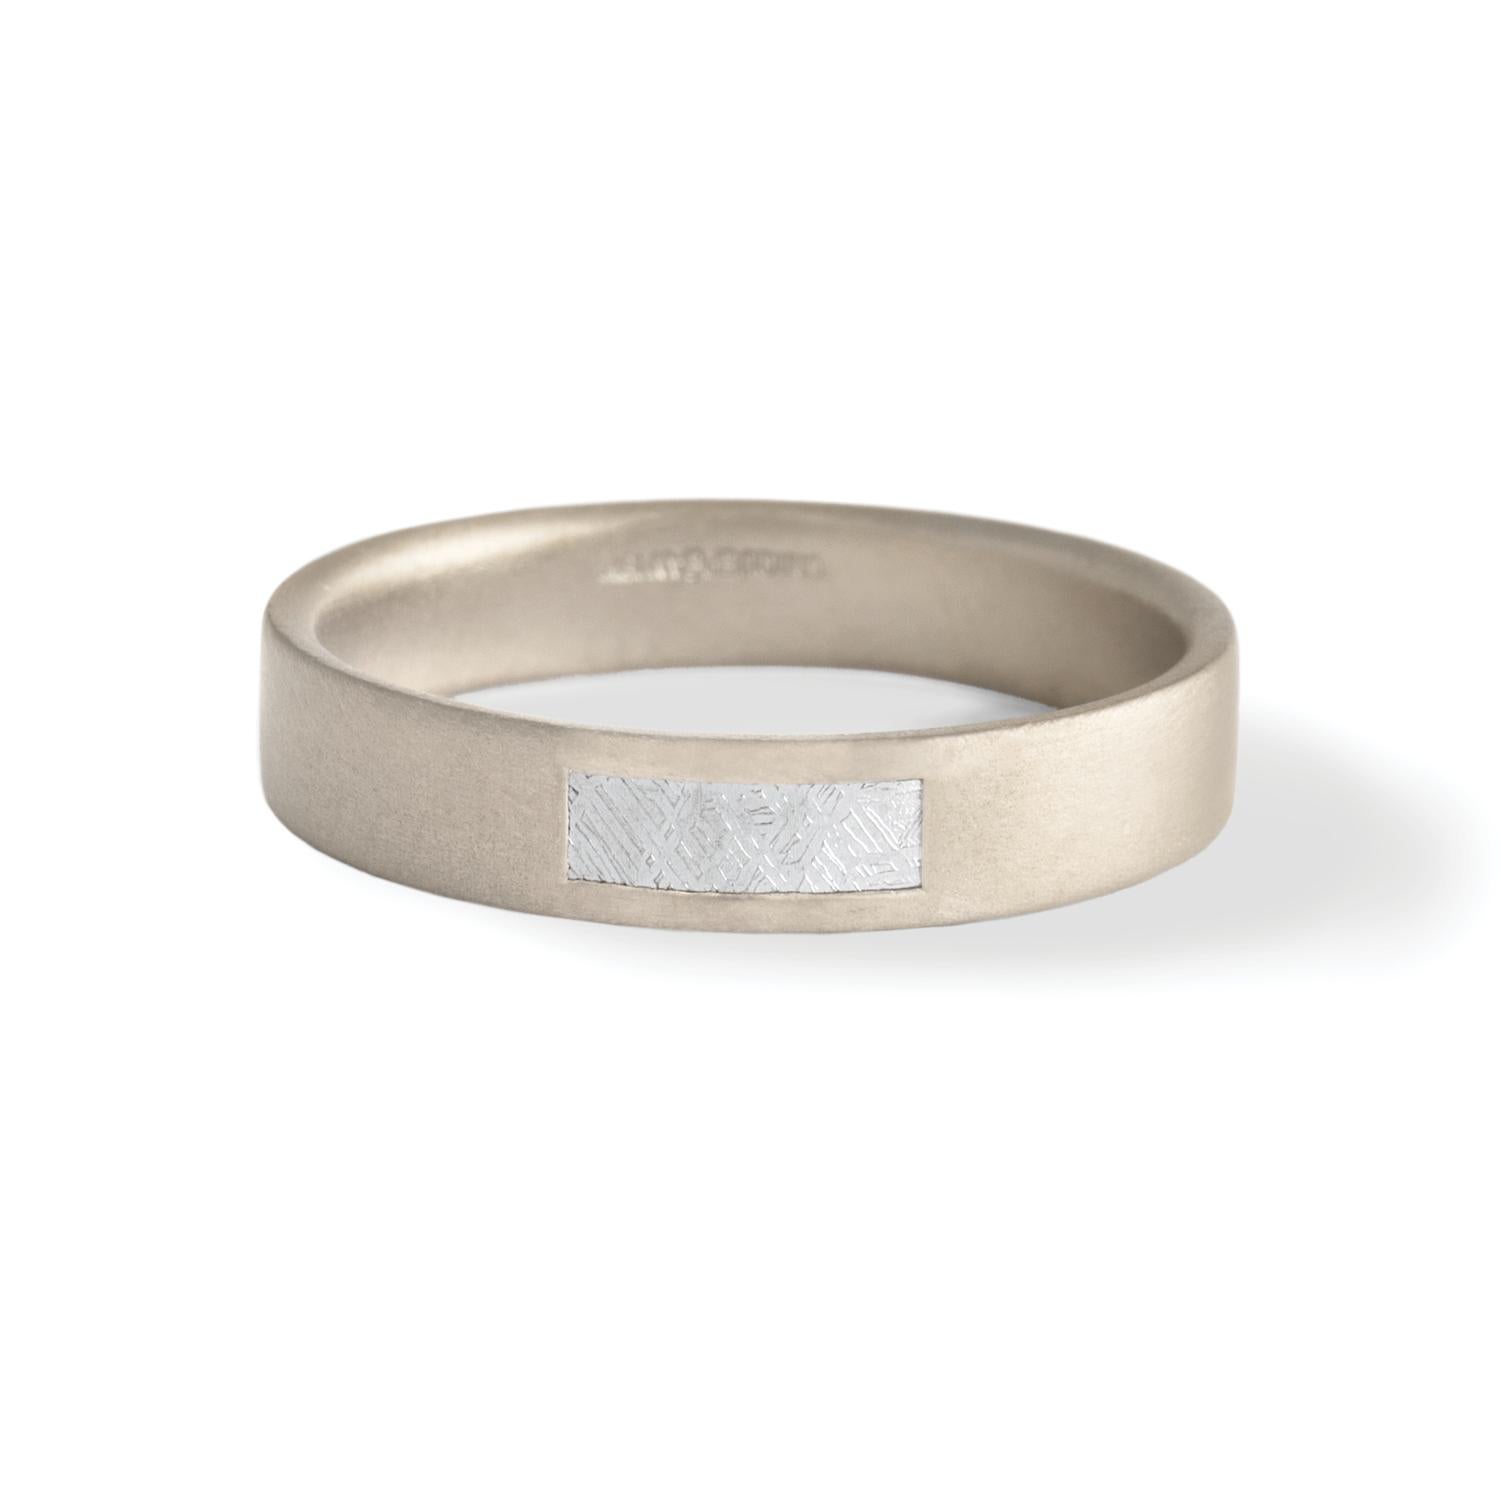 Widmanstätten pattern meteorite inlay band, 4.5mm, 18 carat recycled white gold  - One-of-a-kind

Inspired by the intersection of Earth and cosmos, this ring of 18 carat recycled white gold features a handcrafted inlay panel featuring a 4.6 billion